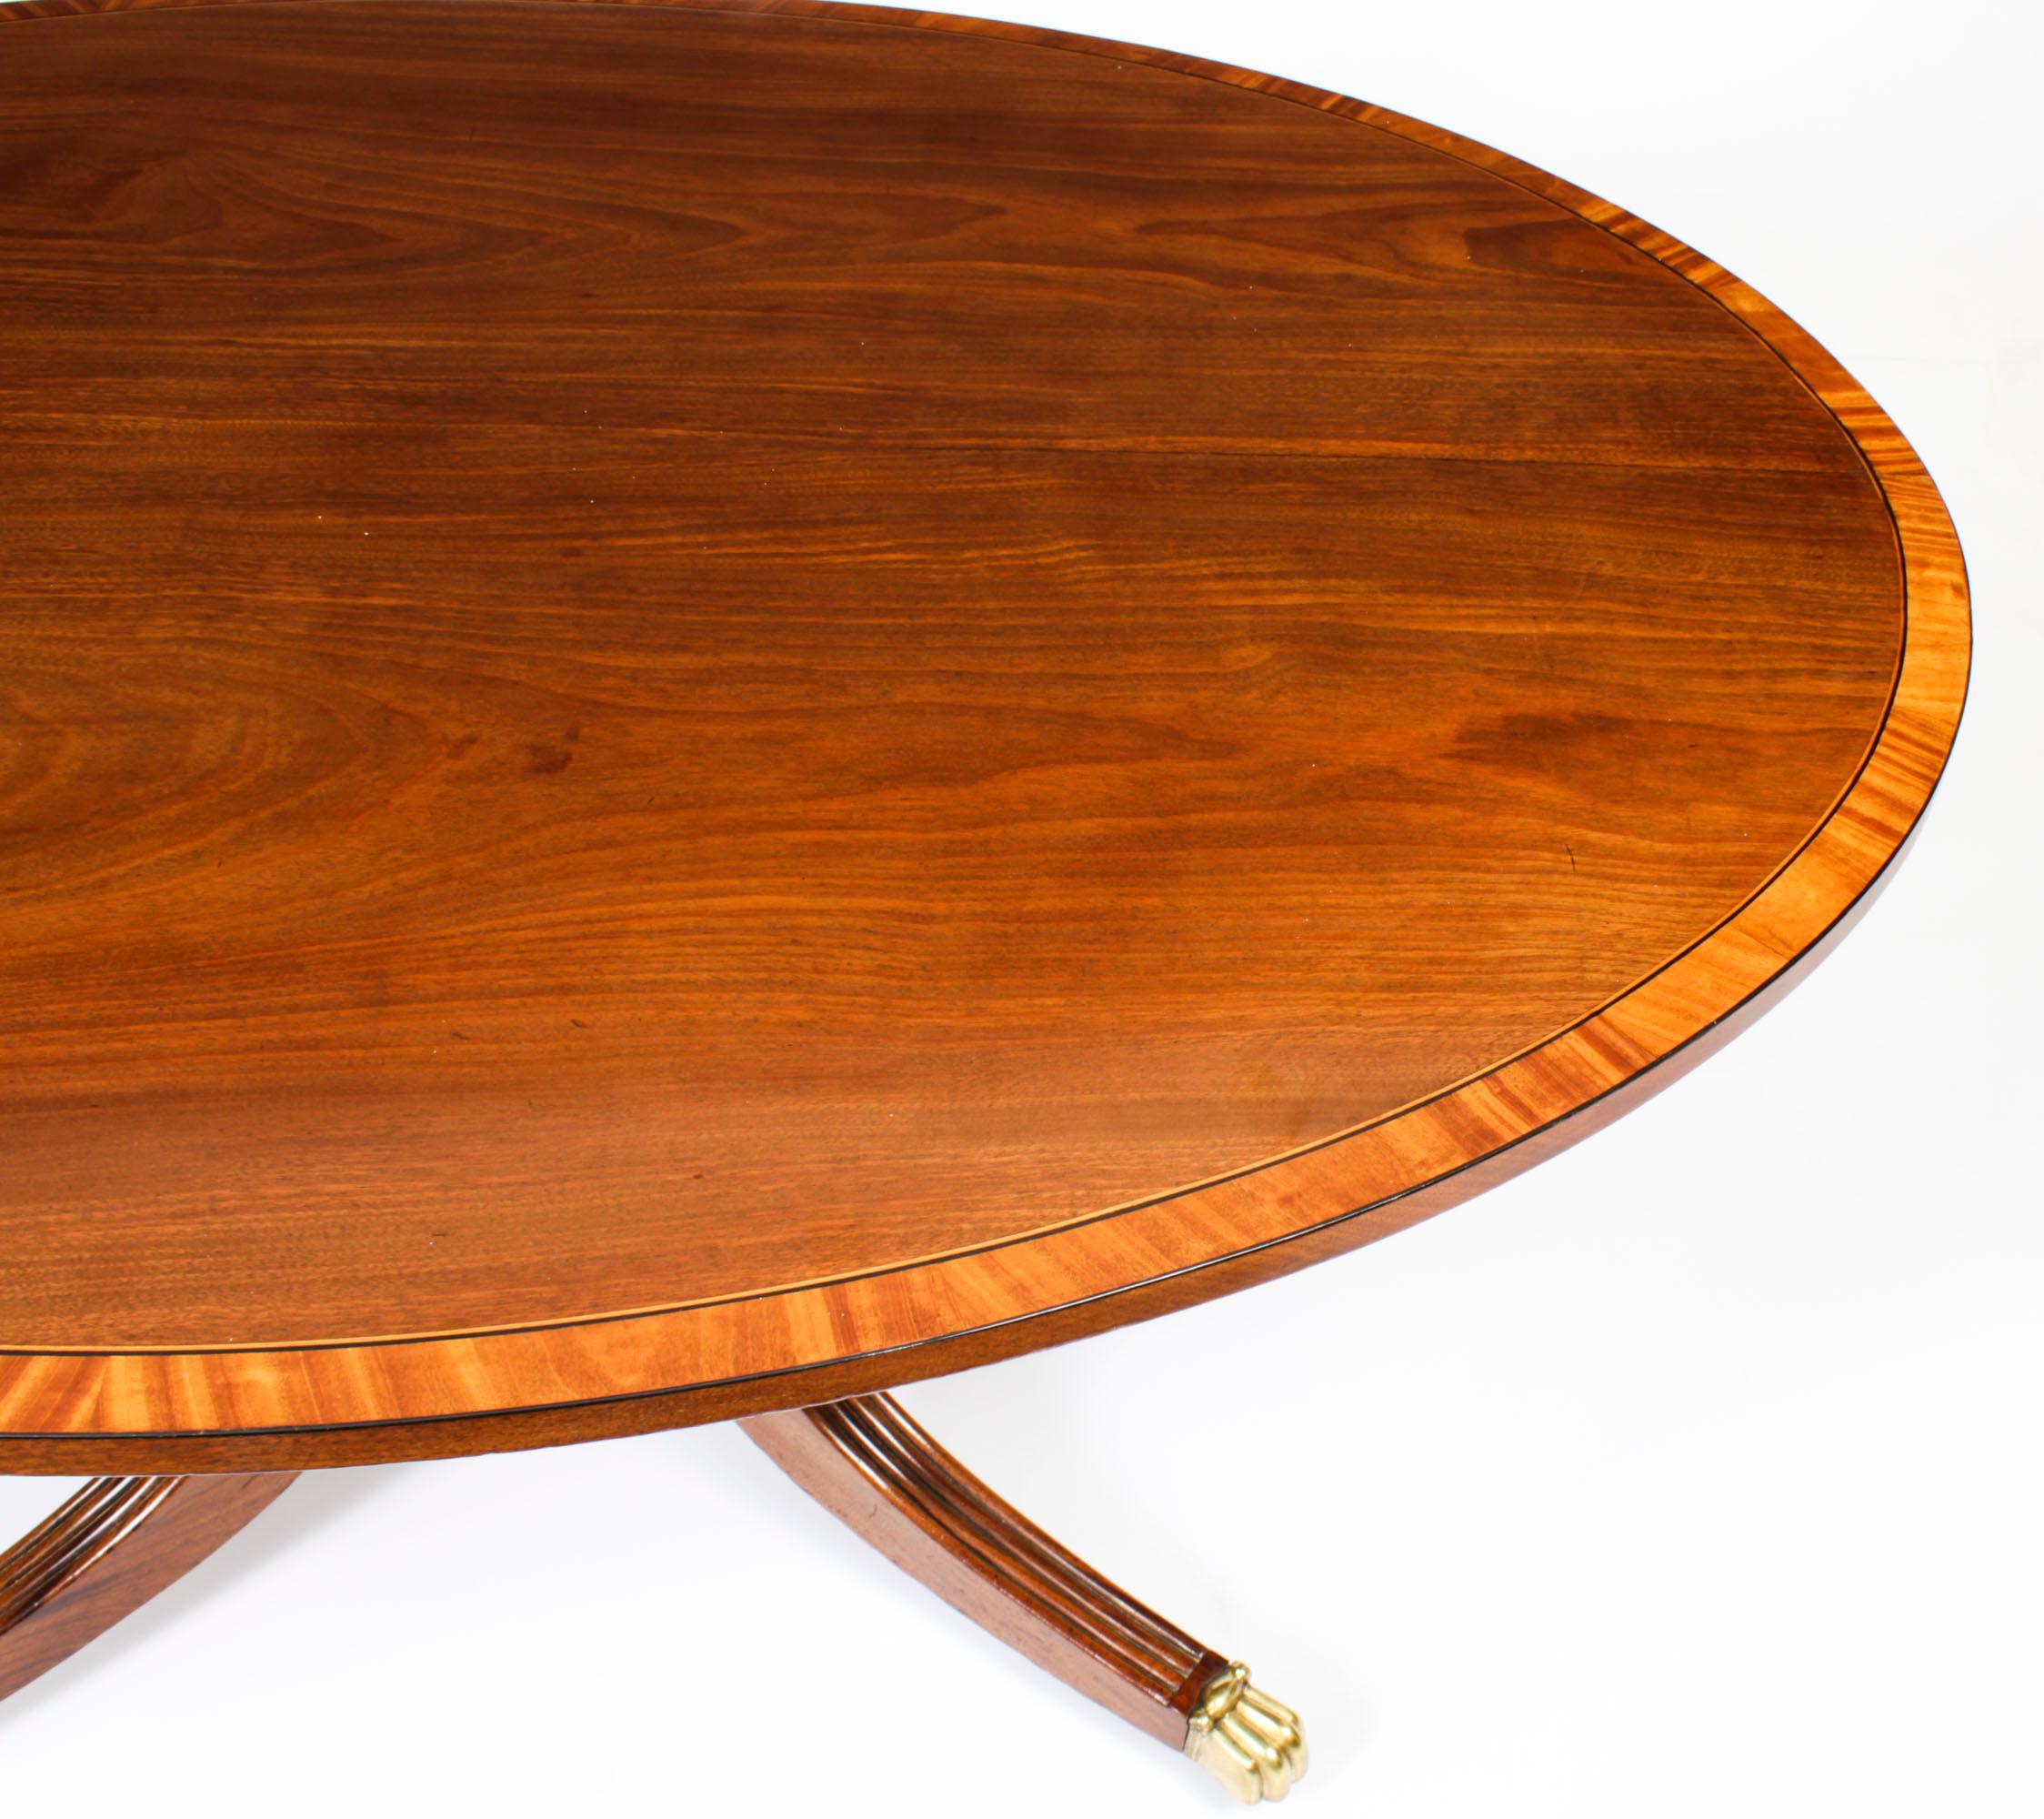 Antique Oval Regency Flame Mahogany Dining Table 19th C In Good Condition For Sale In London, GB